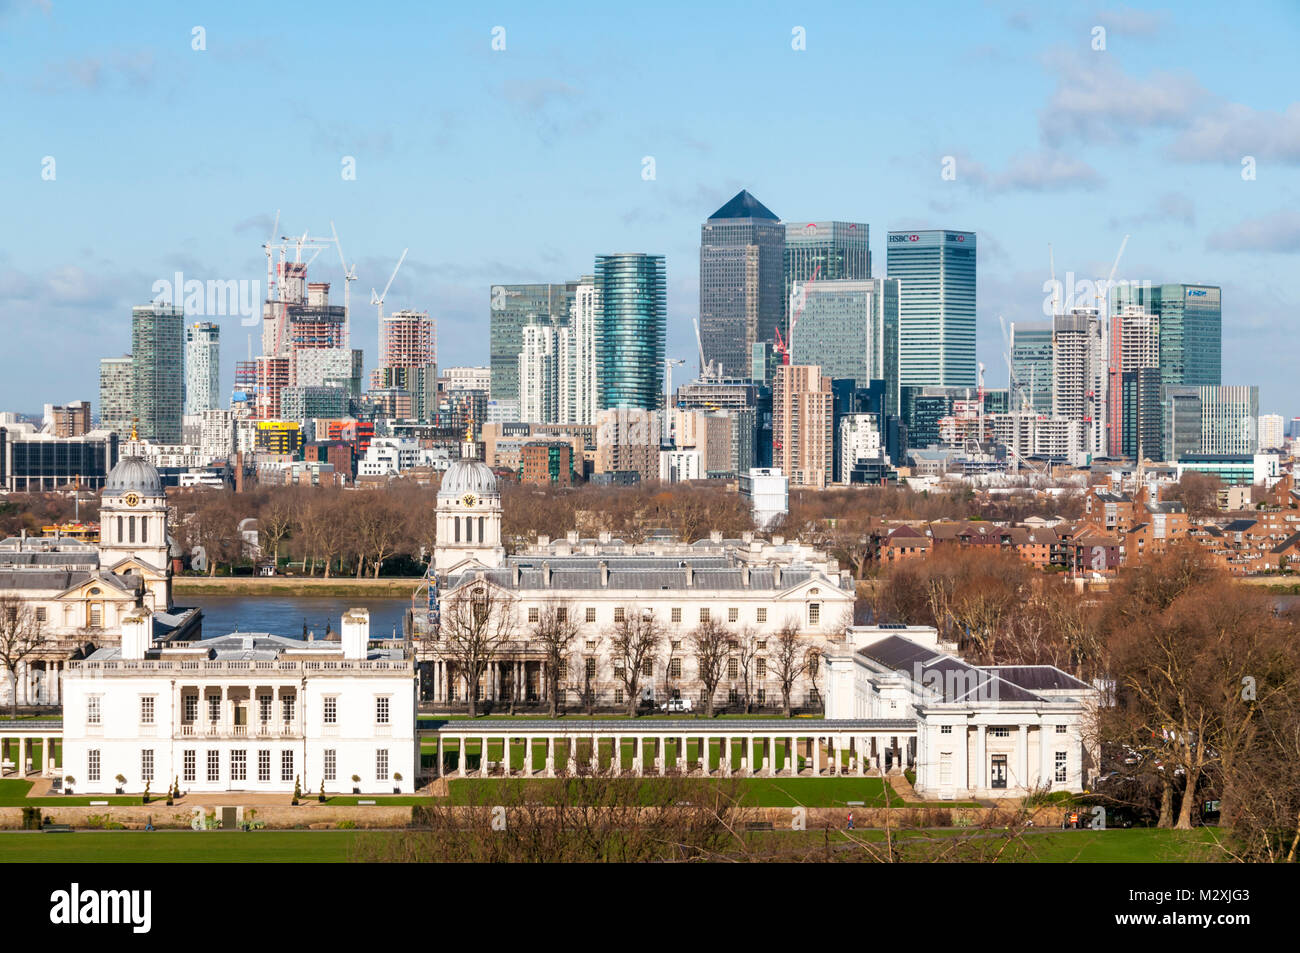 London Docklands & Canary Wharf seen From Greenwich over the Queen's House & Old Royal Naval College. Stock Photo